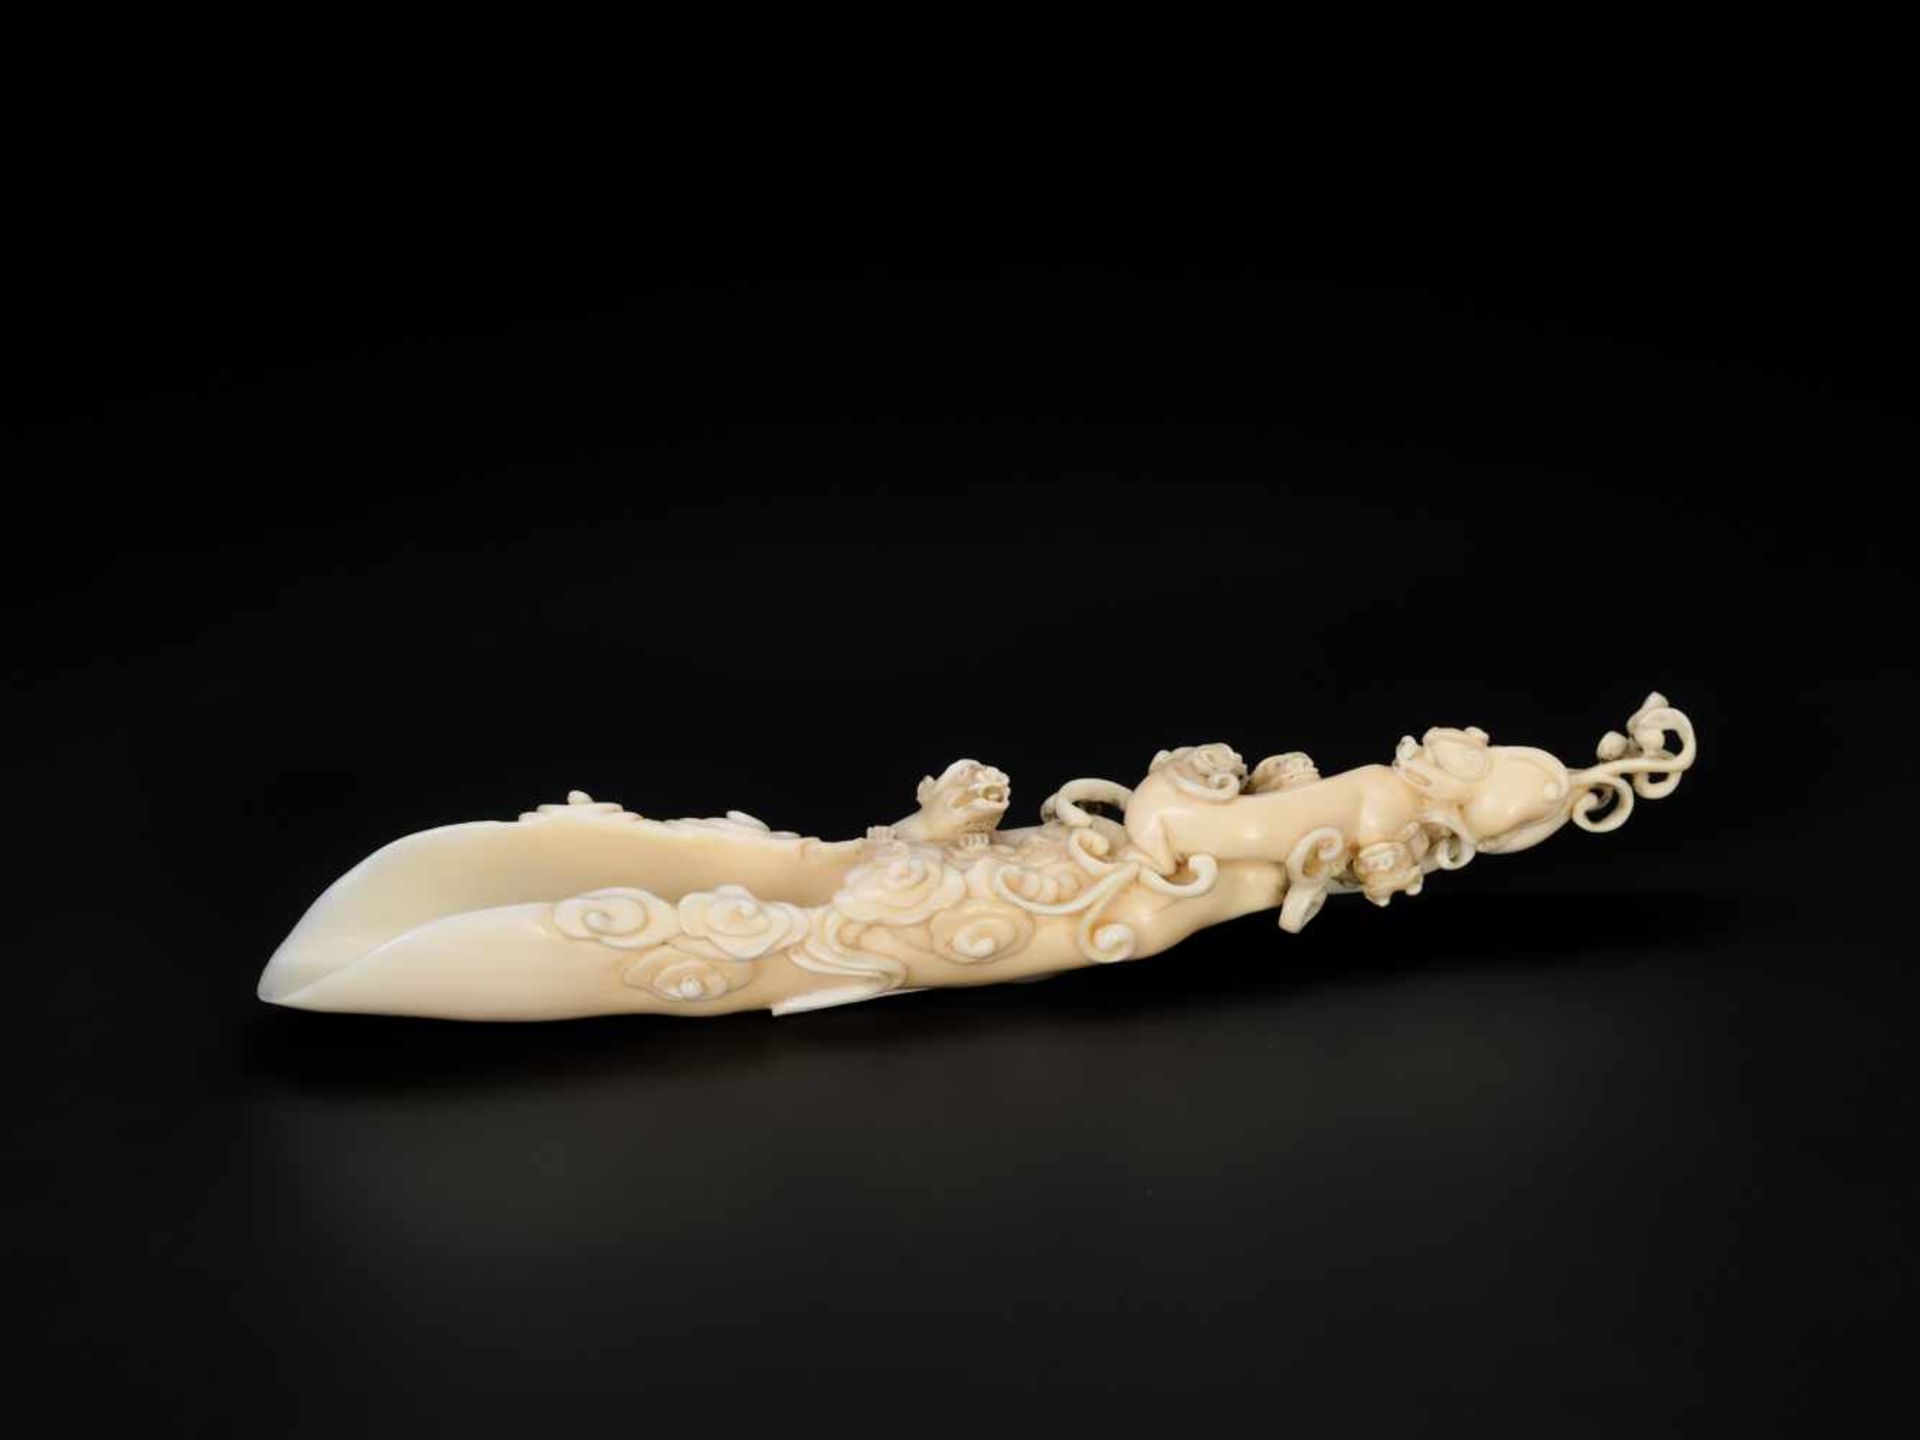 AN 18TH CENTURY IVORY RAFT-FORM POURING VESSEL WITH CHILONG Ivory China, 18th centuryThis masterly